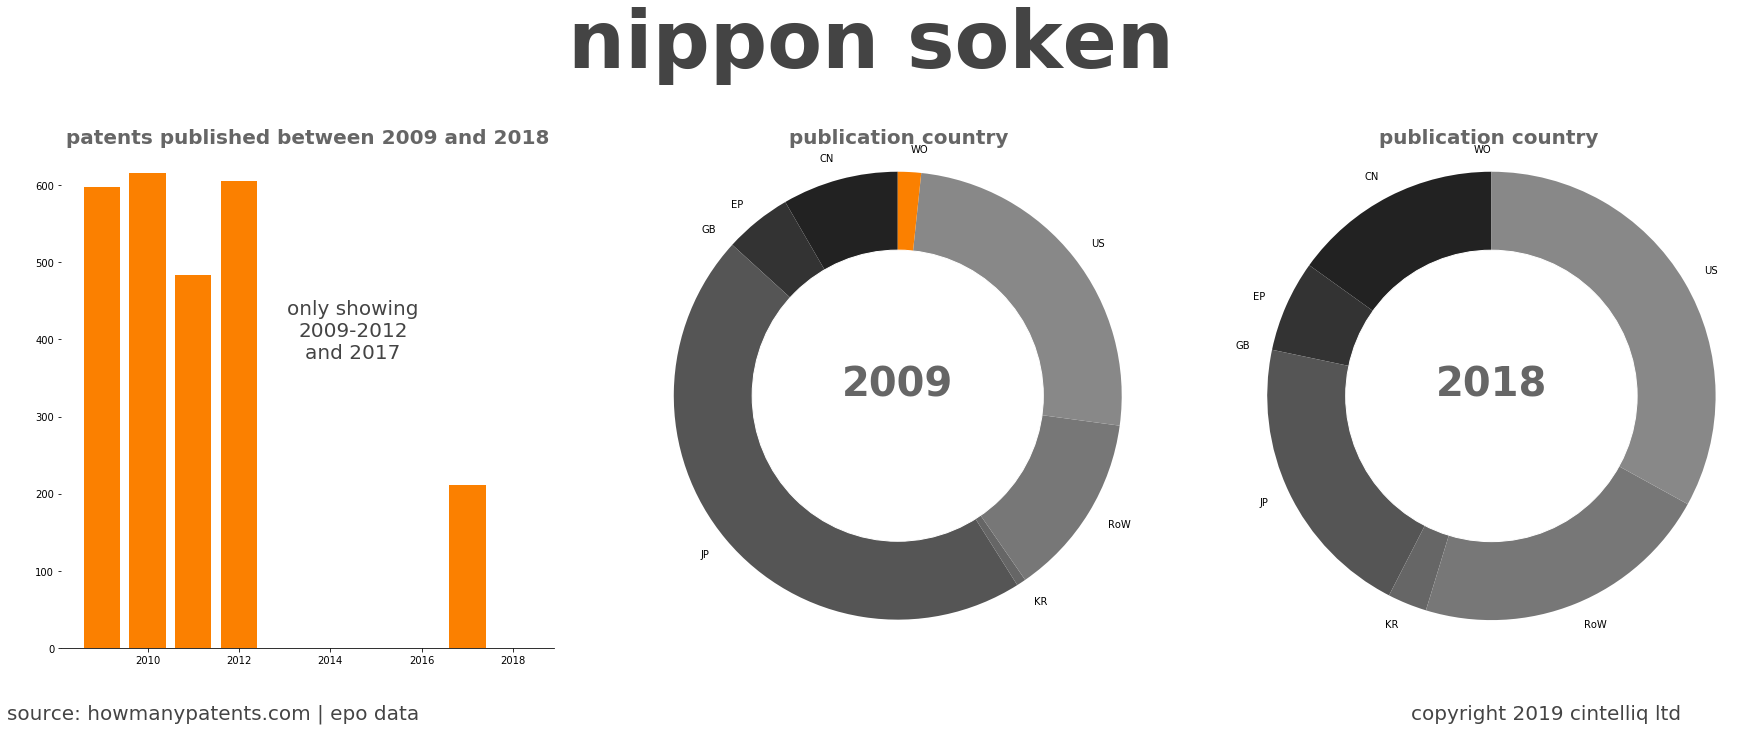 summary of patents for Nippon Soken